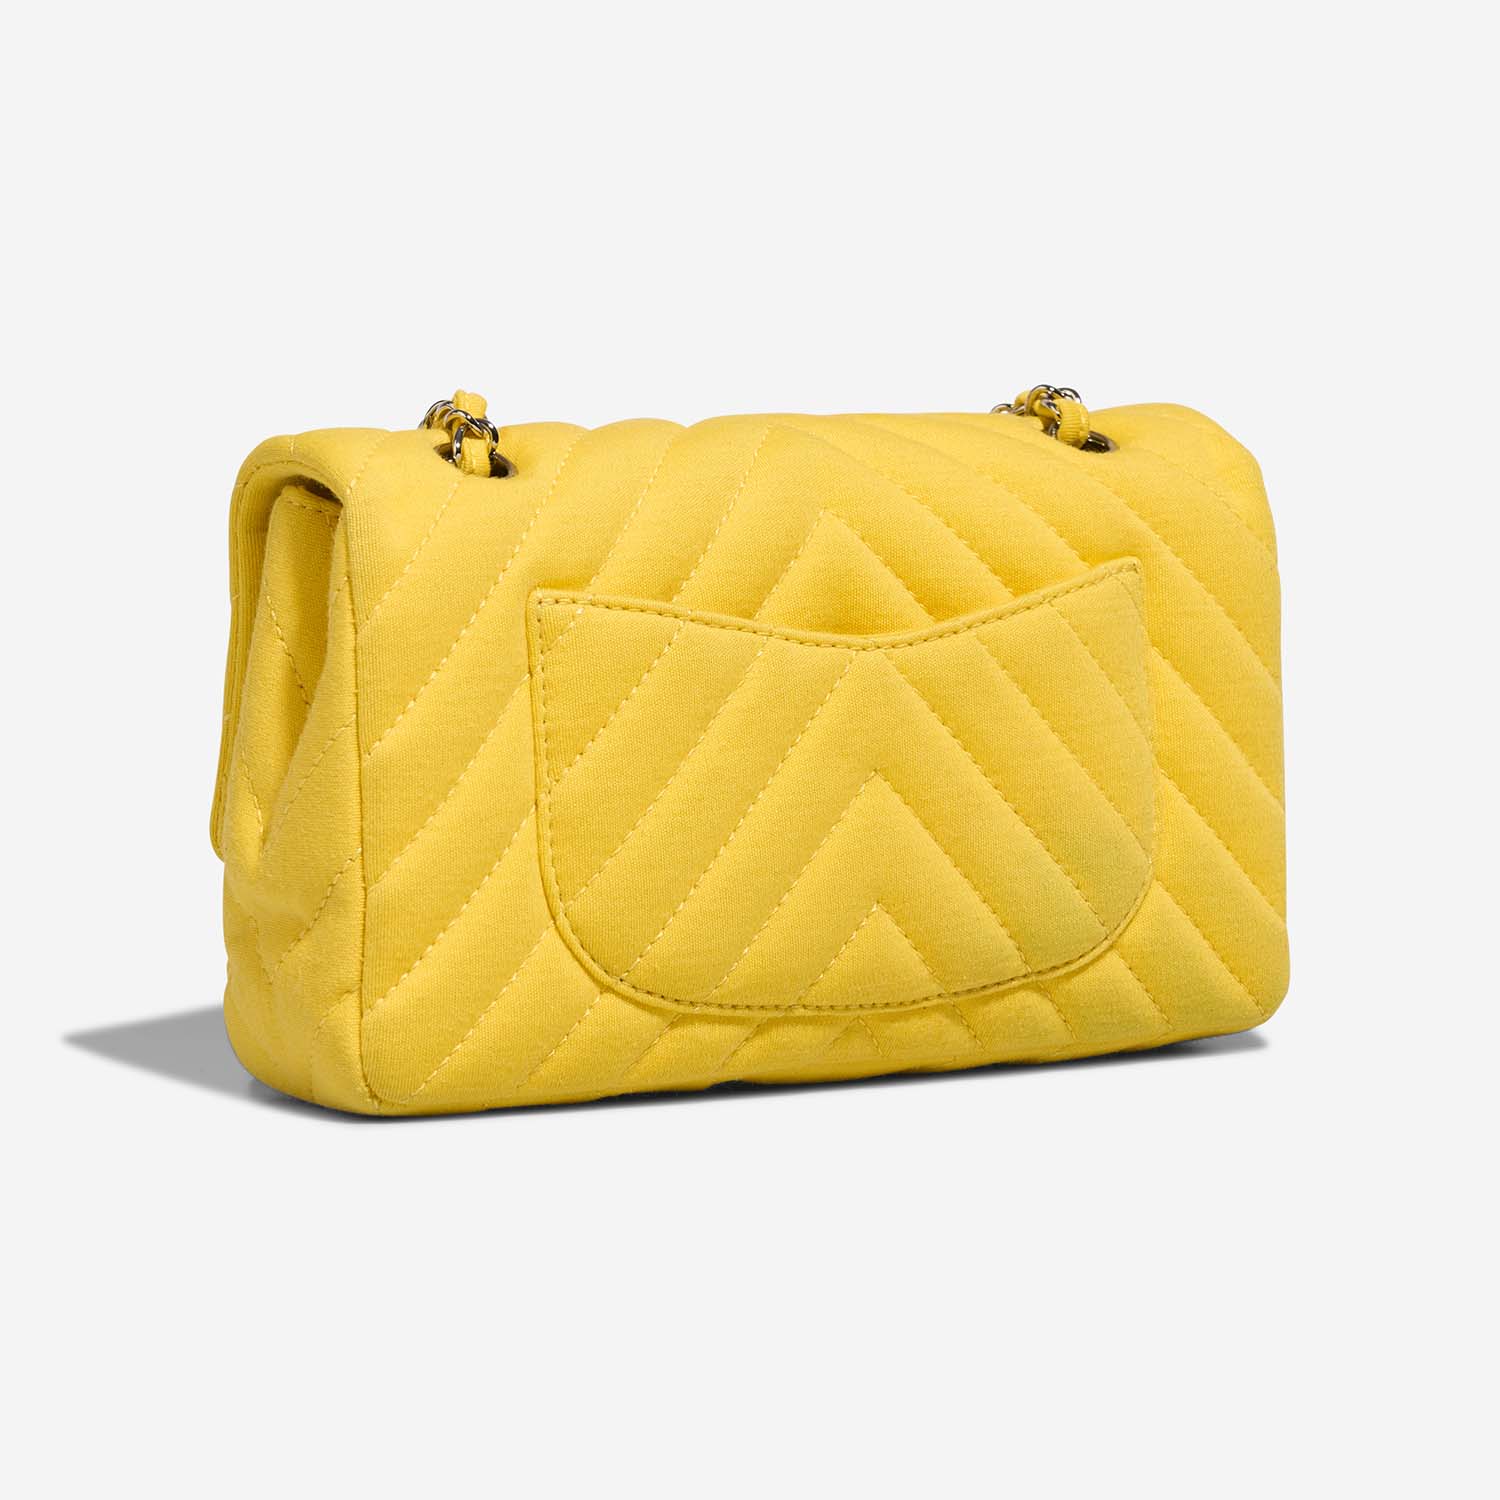 Chanel Timeless Medium Yellow Side Back | Sell your designer bag on Saclab.com